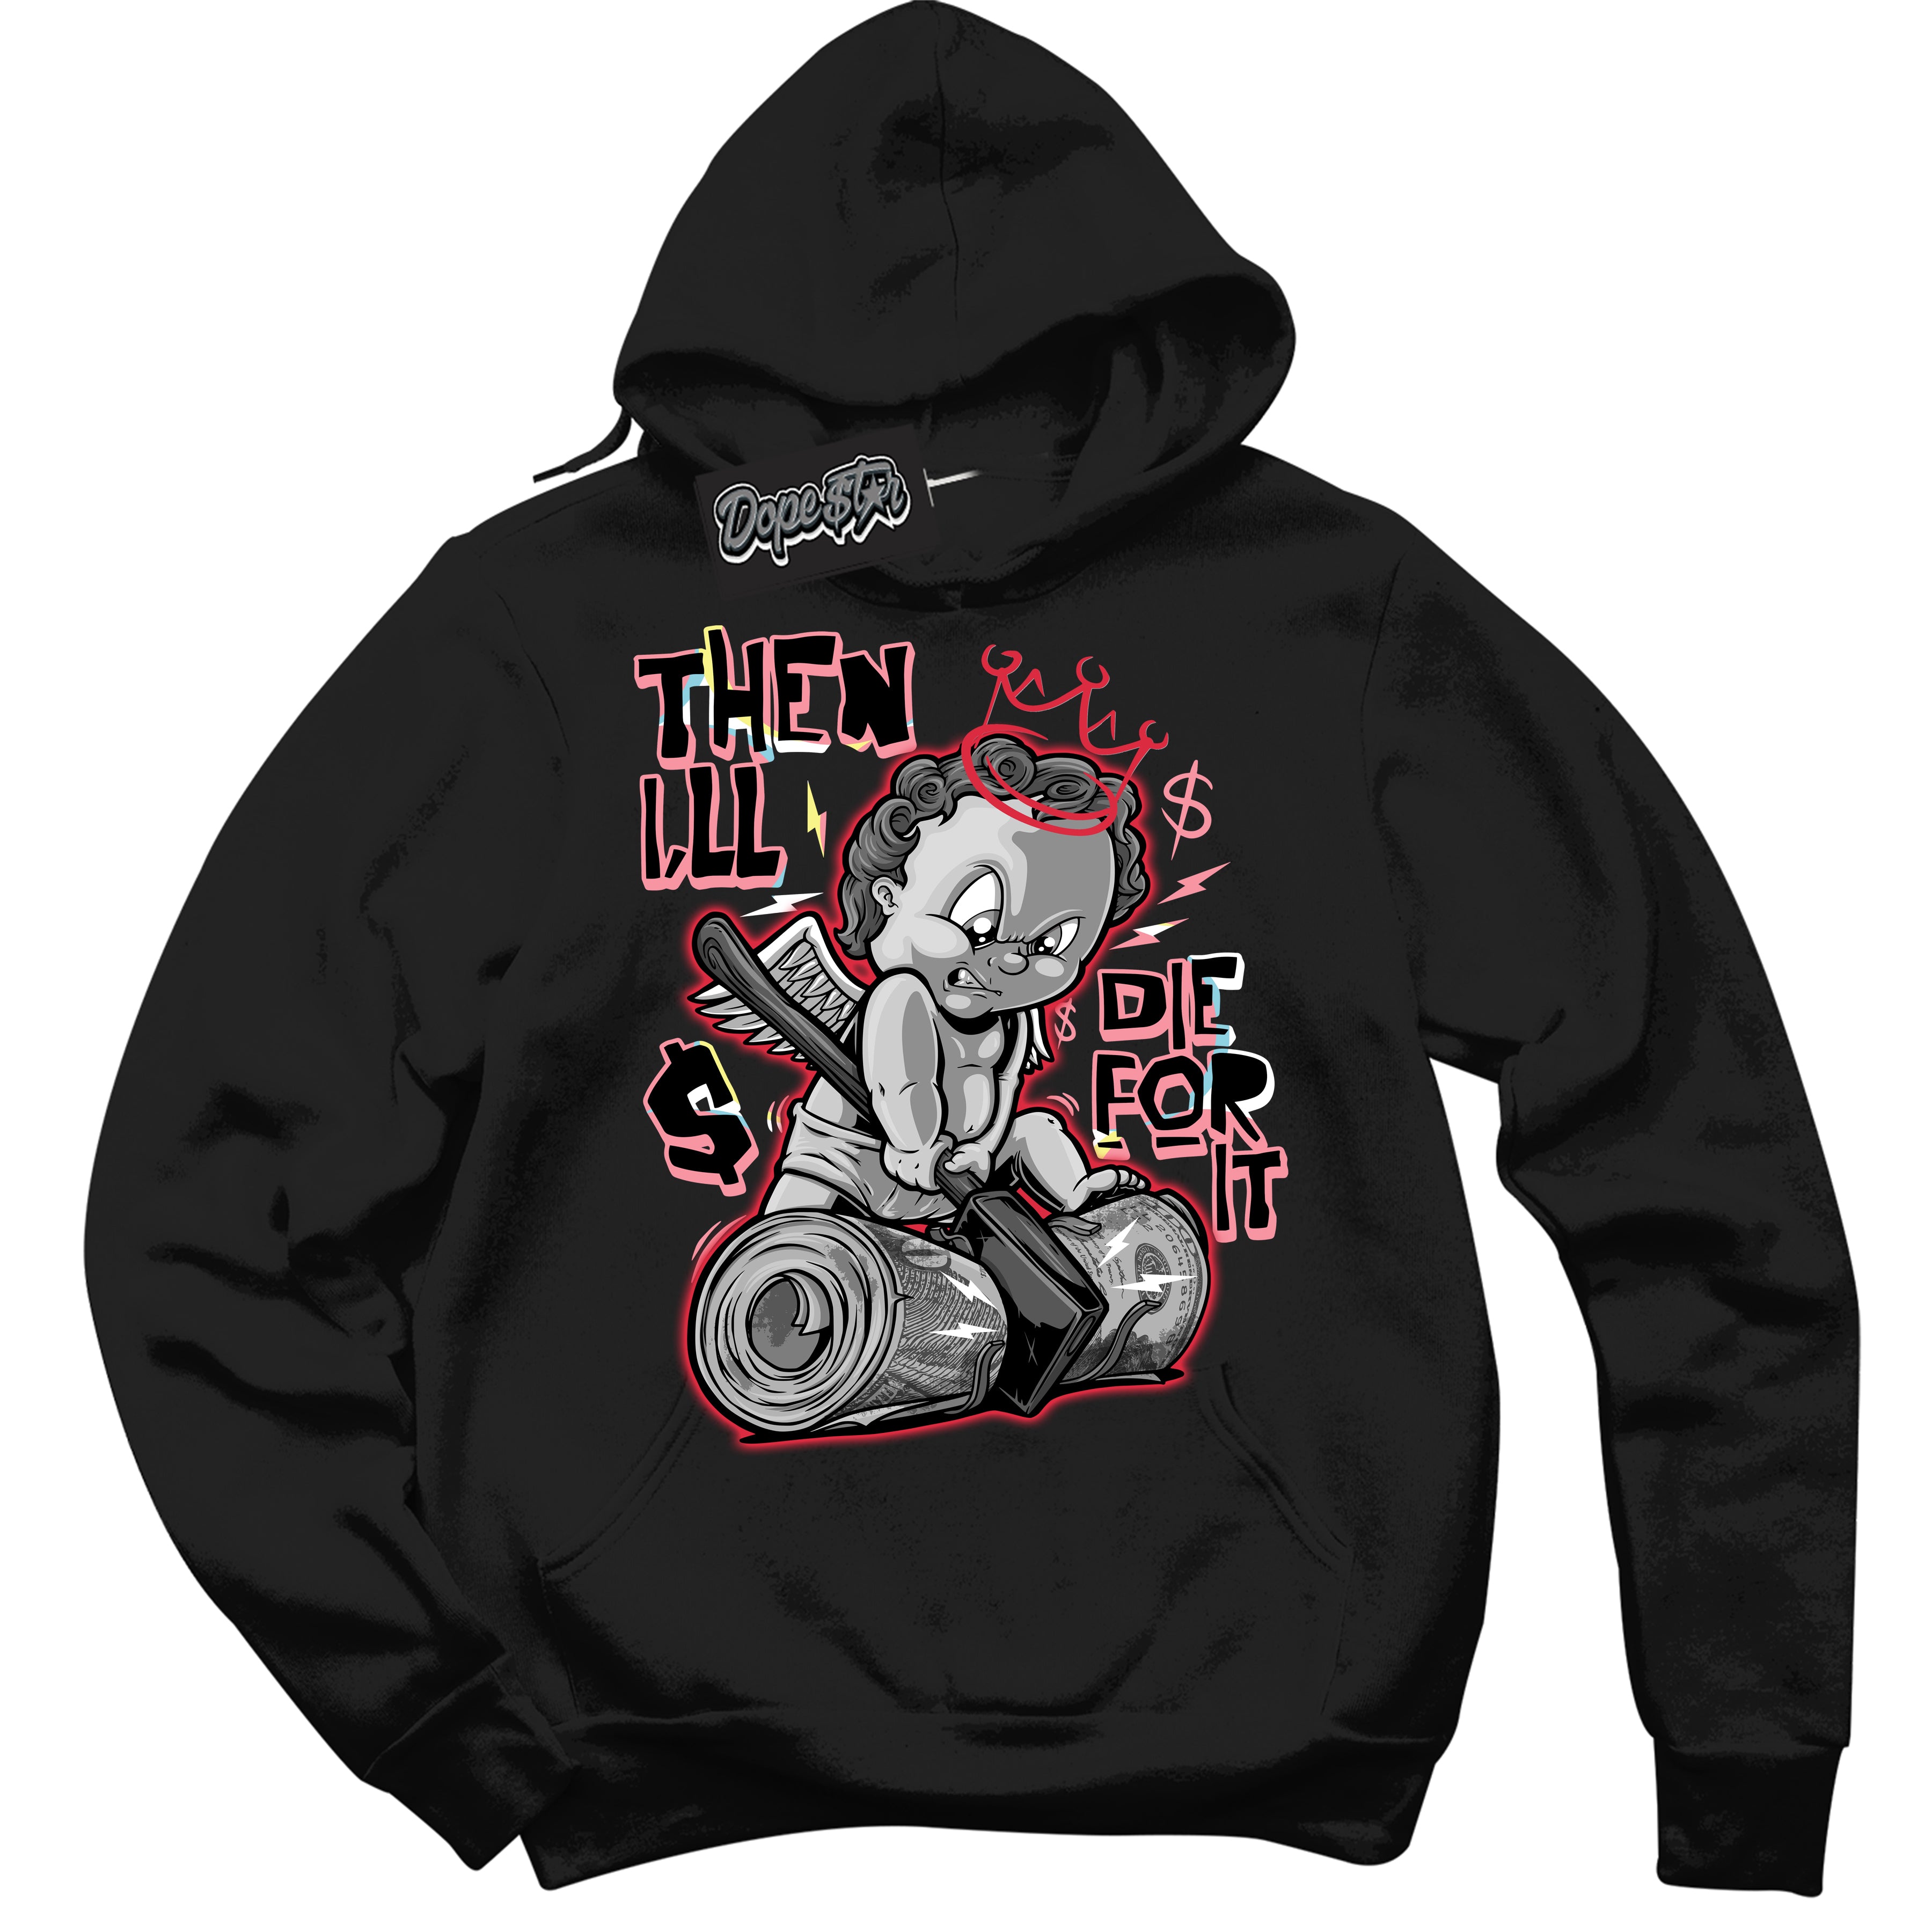 Cool Black Graphic DopeStar Hoodie with “ Then I'll “ print, that perfectly matches Spider-Verse 1s sneakers